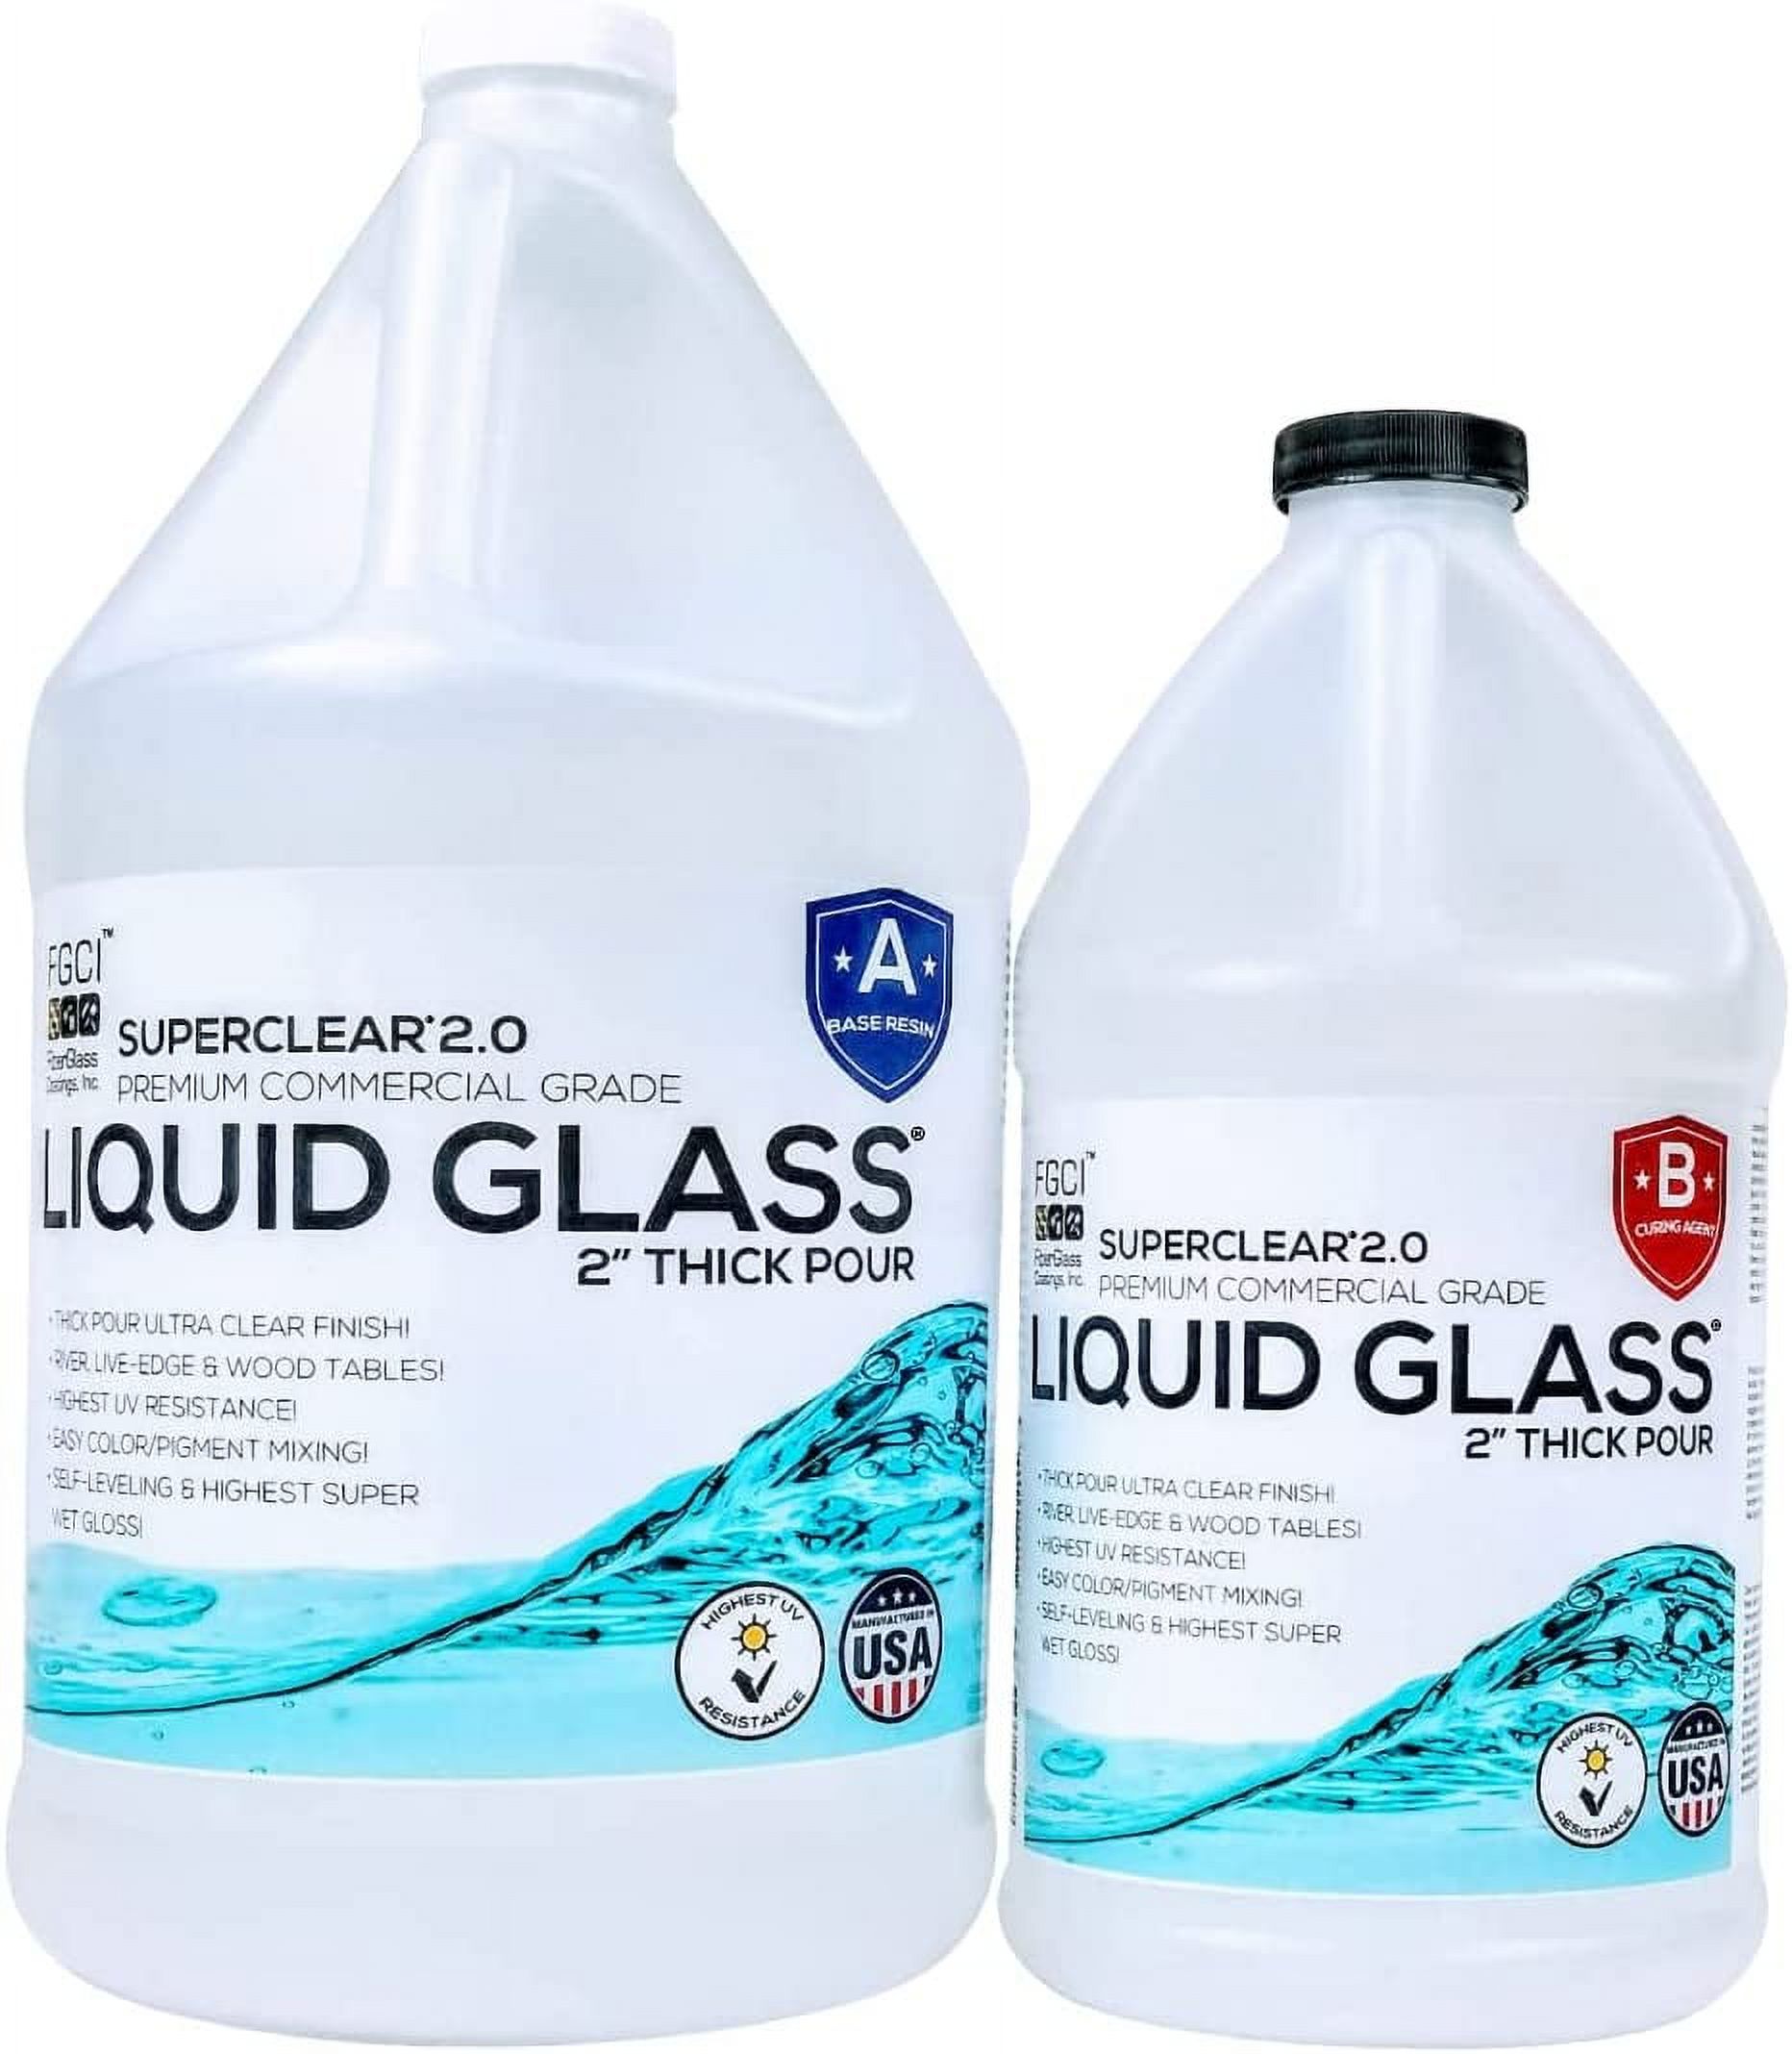 Superclear Deep Pour Premium Commercial Grade Epoxy Resin Kit, 1.5 Gallons  - 2:1 Crystal Clear Liquid Glass Pouring up to 2-4 - Self-Leveling Food